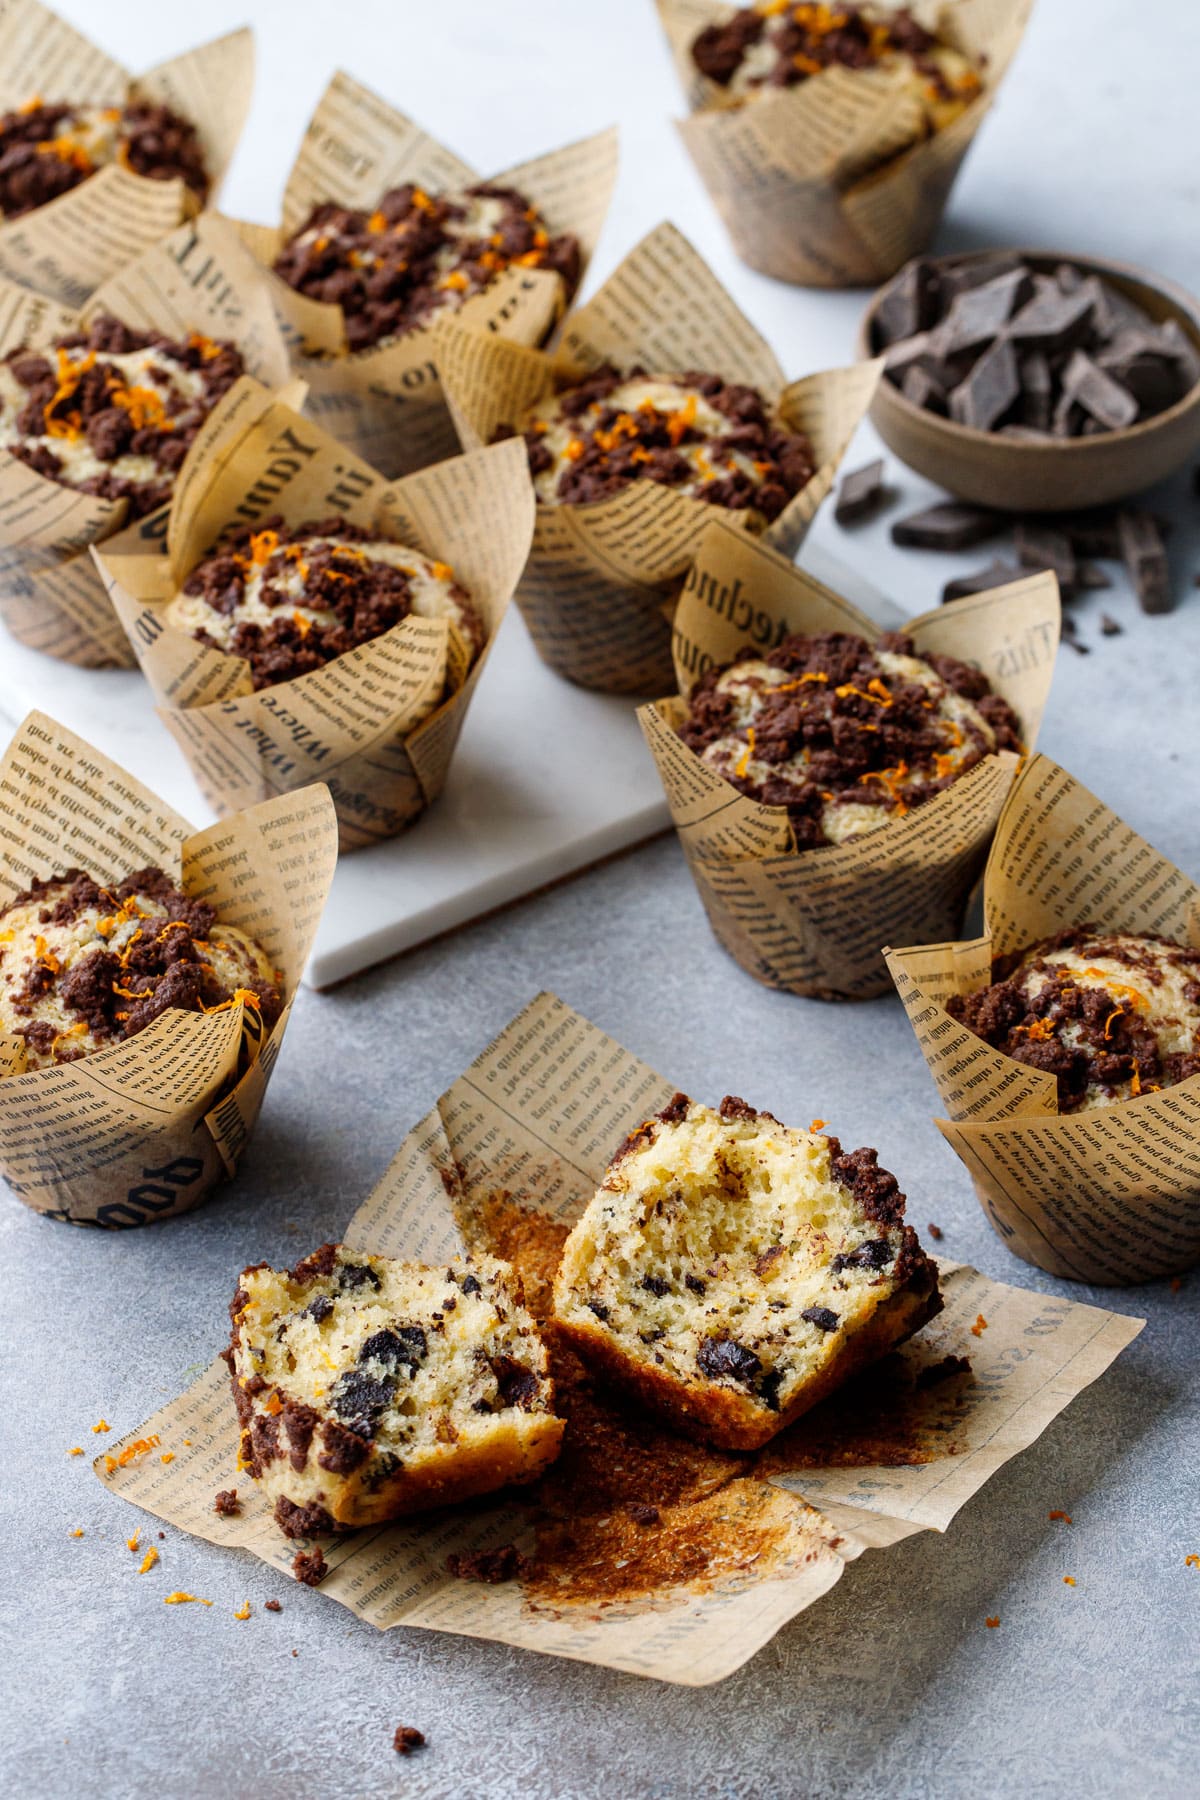 Chocolate Orange Streusel Muffins on a gray background, one muffin broken in half to show the fluffy interior texture.